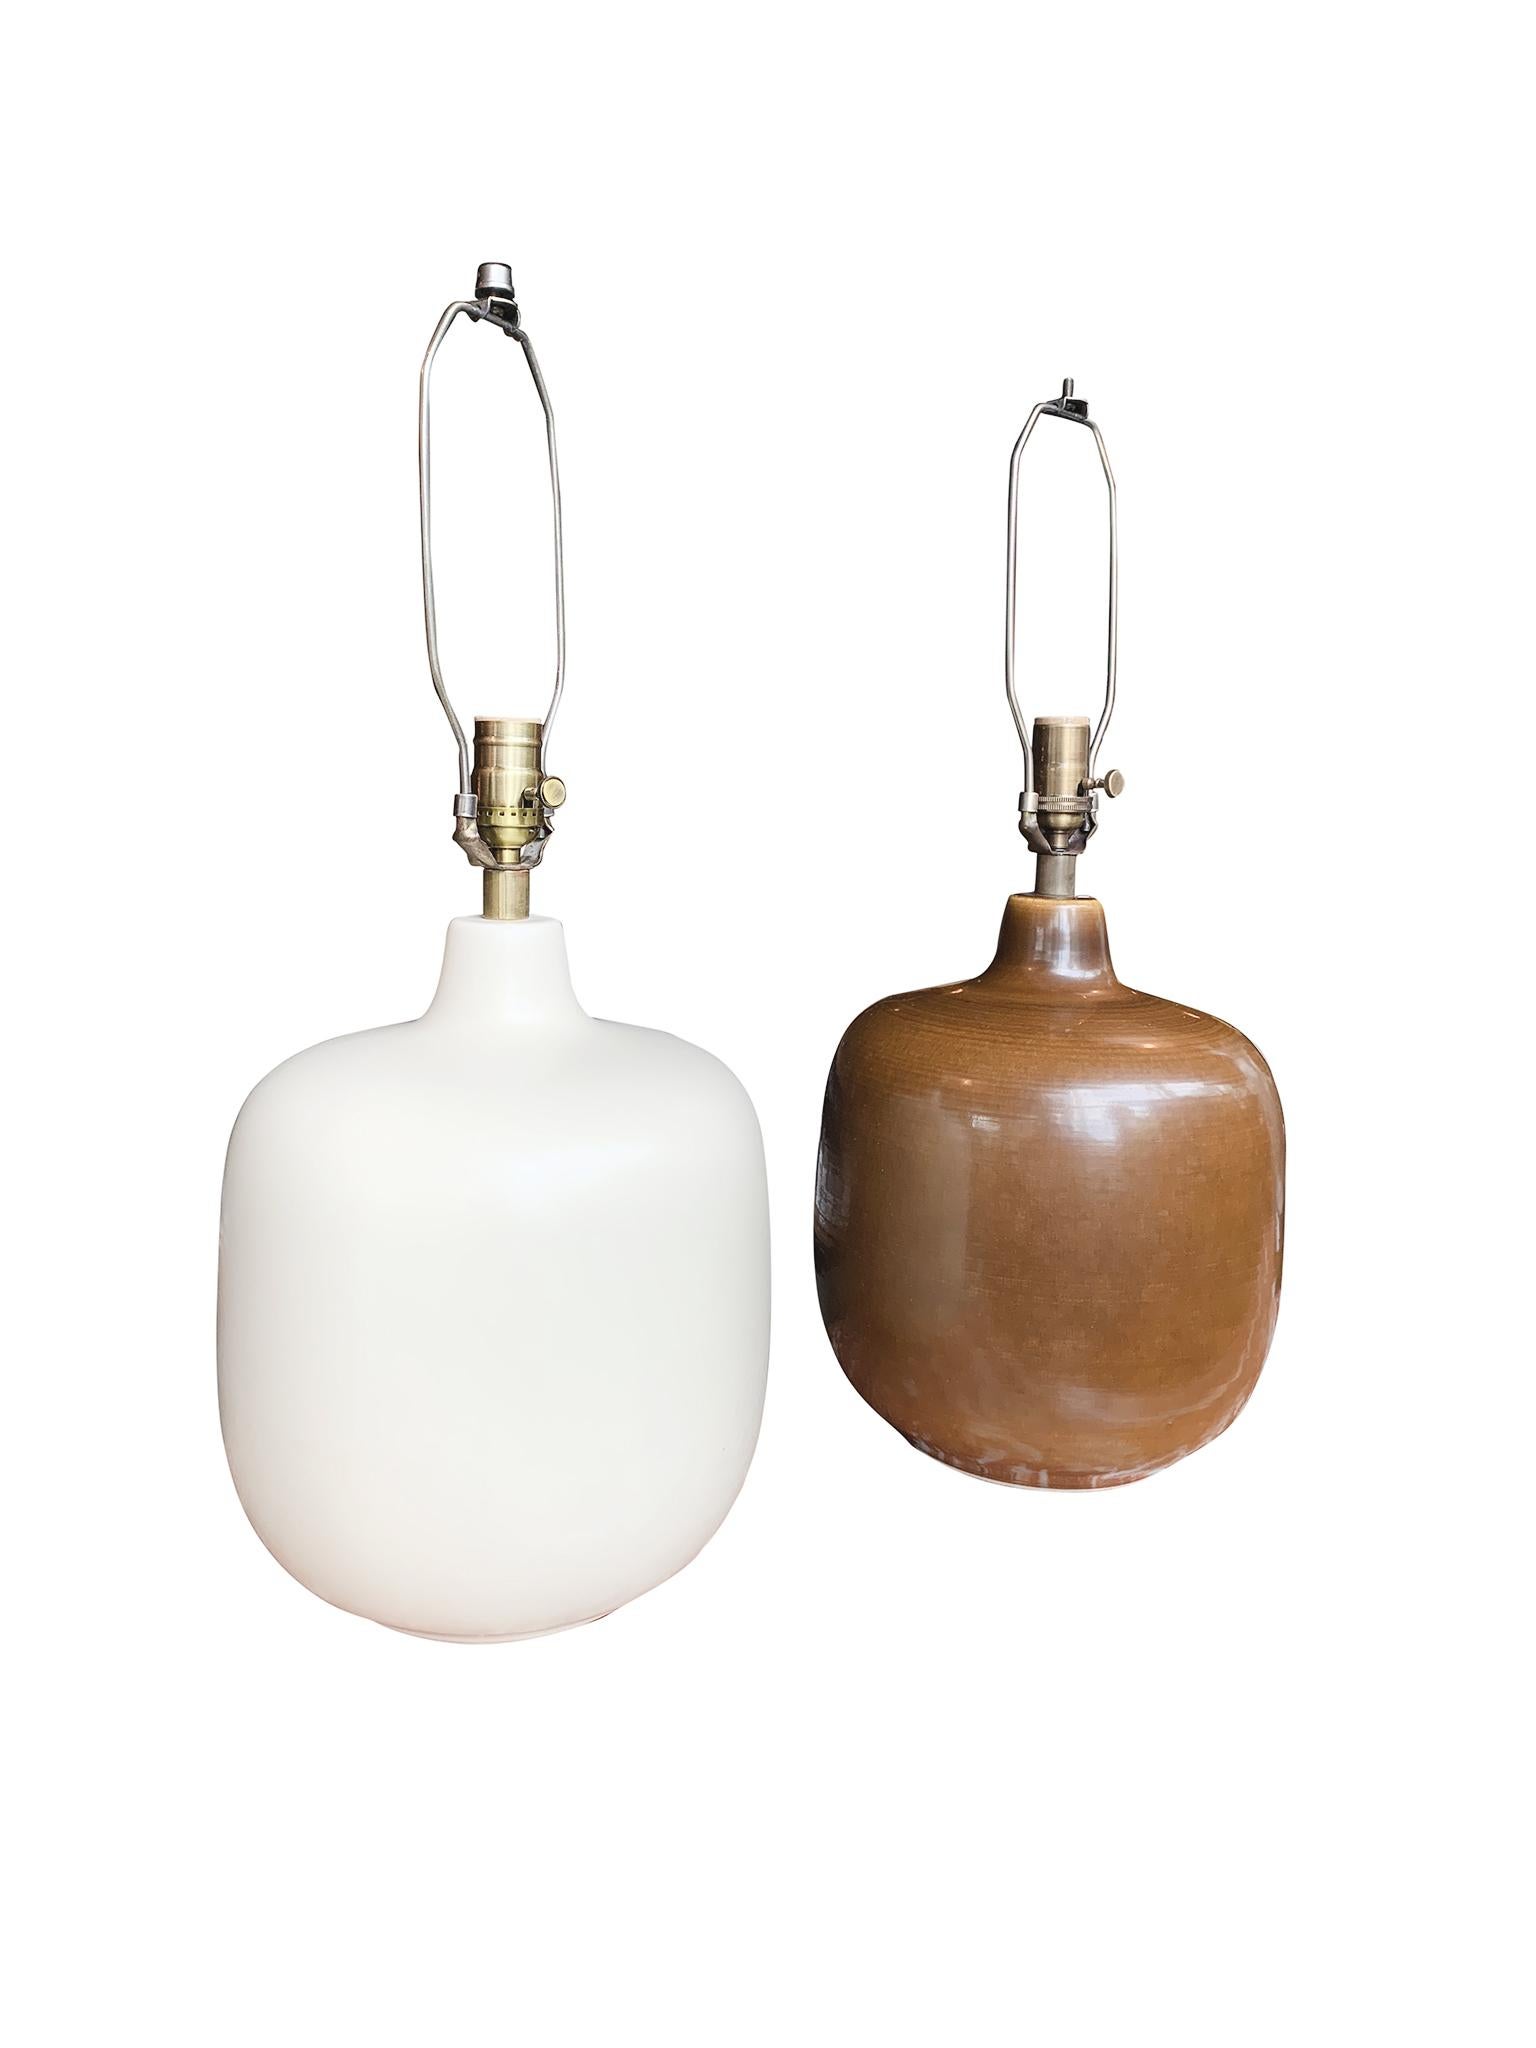 An exceptional set of 2 midcentury Danish Modern ceramic table lamps by Lotte and Gunnar Bostlund. The set is comprised of one lamp in a matte white and another lamp in an ocher yellow-brown glaze. Both lamps are elegantly understated with a round